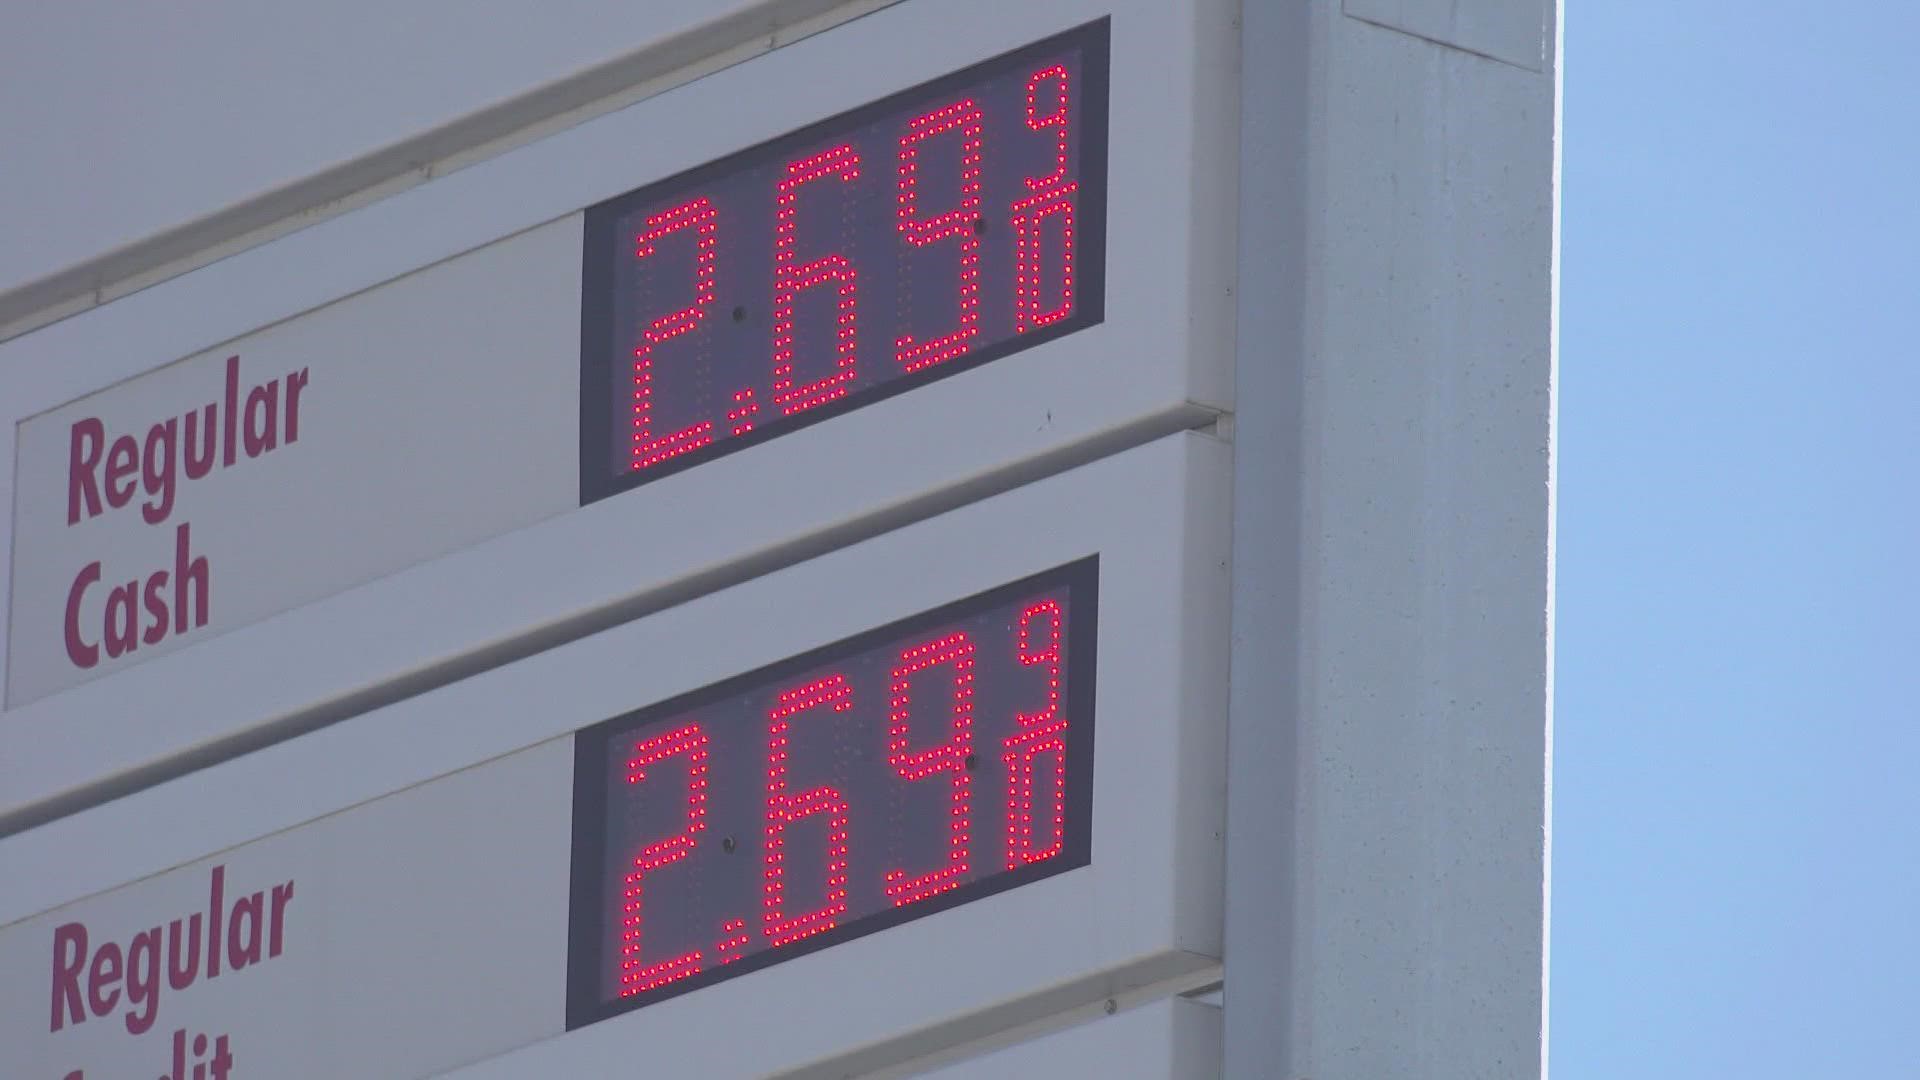 More than 8.3 million people across Texas will be taking advantage of lower prices